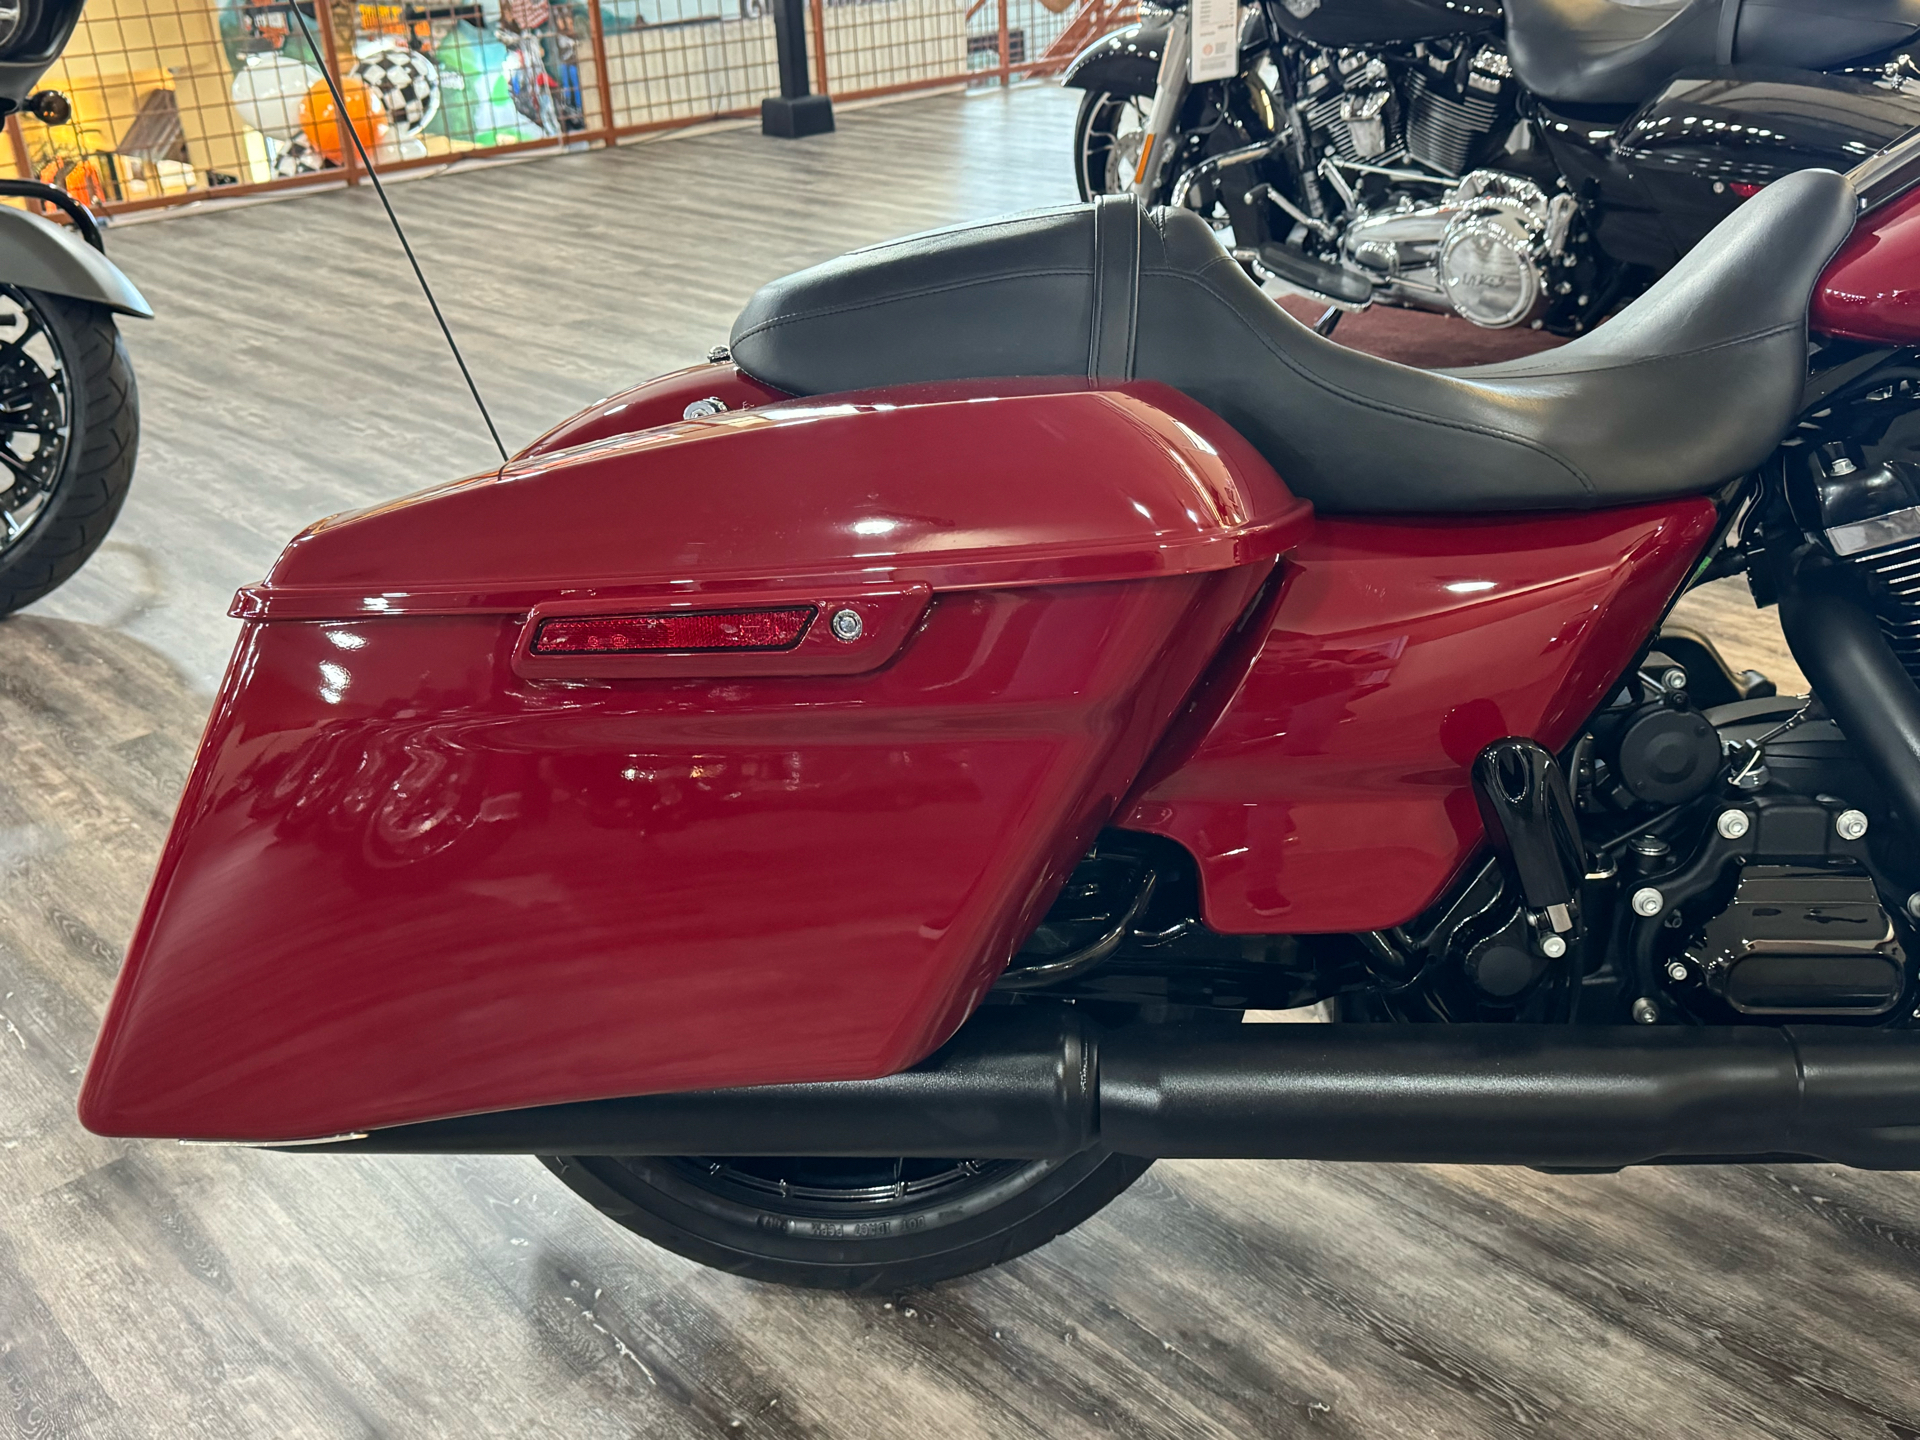 2020 Harley-Davidson Road Glide® Special in Knoxville, Tennessee - Photo 10